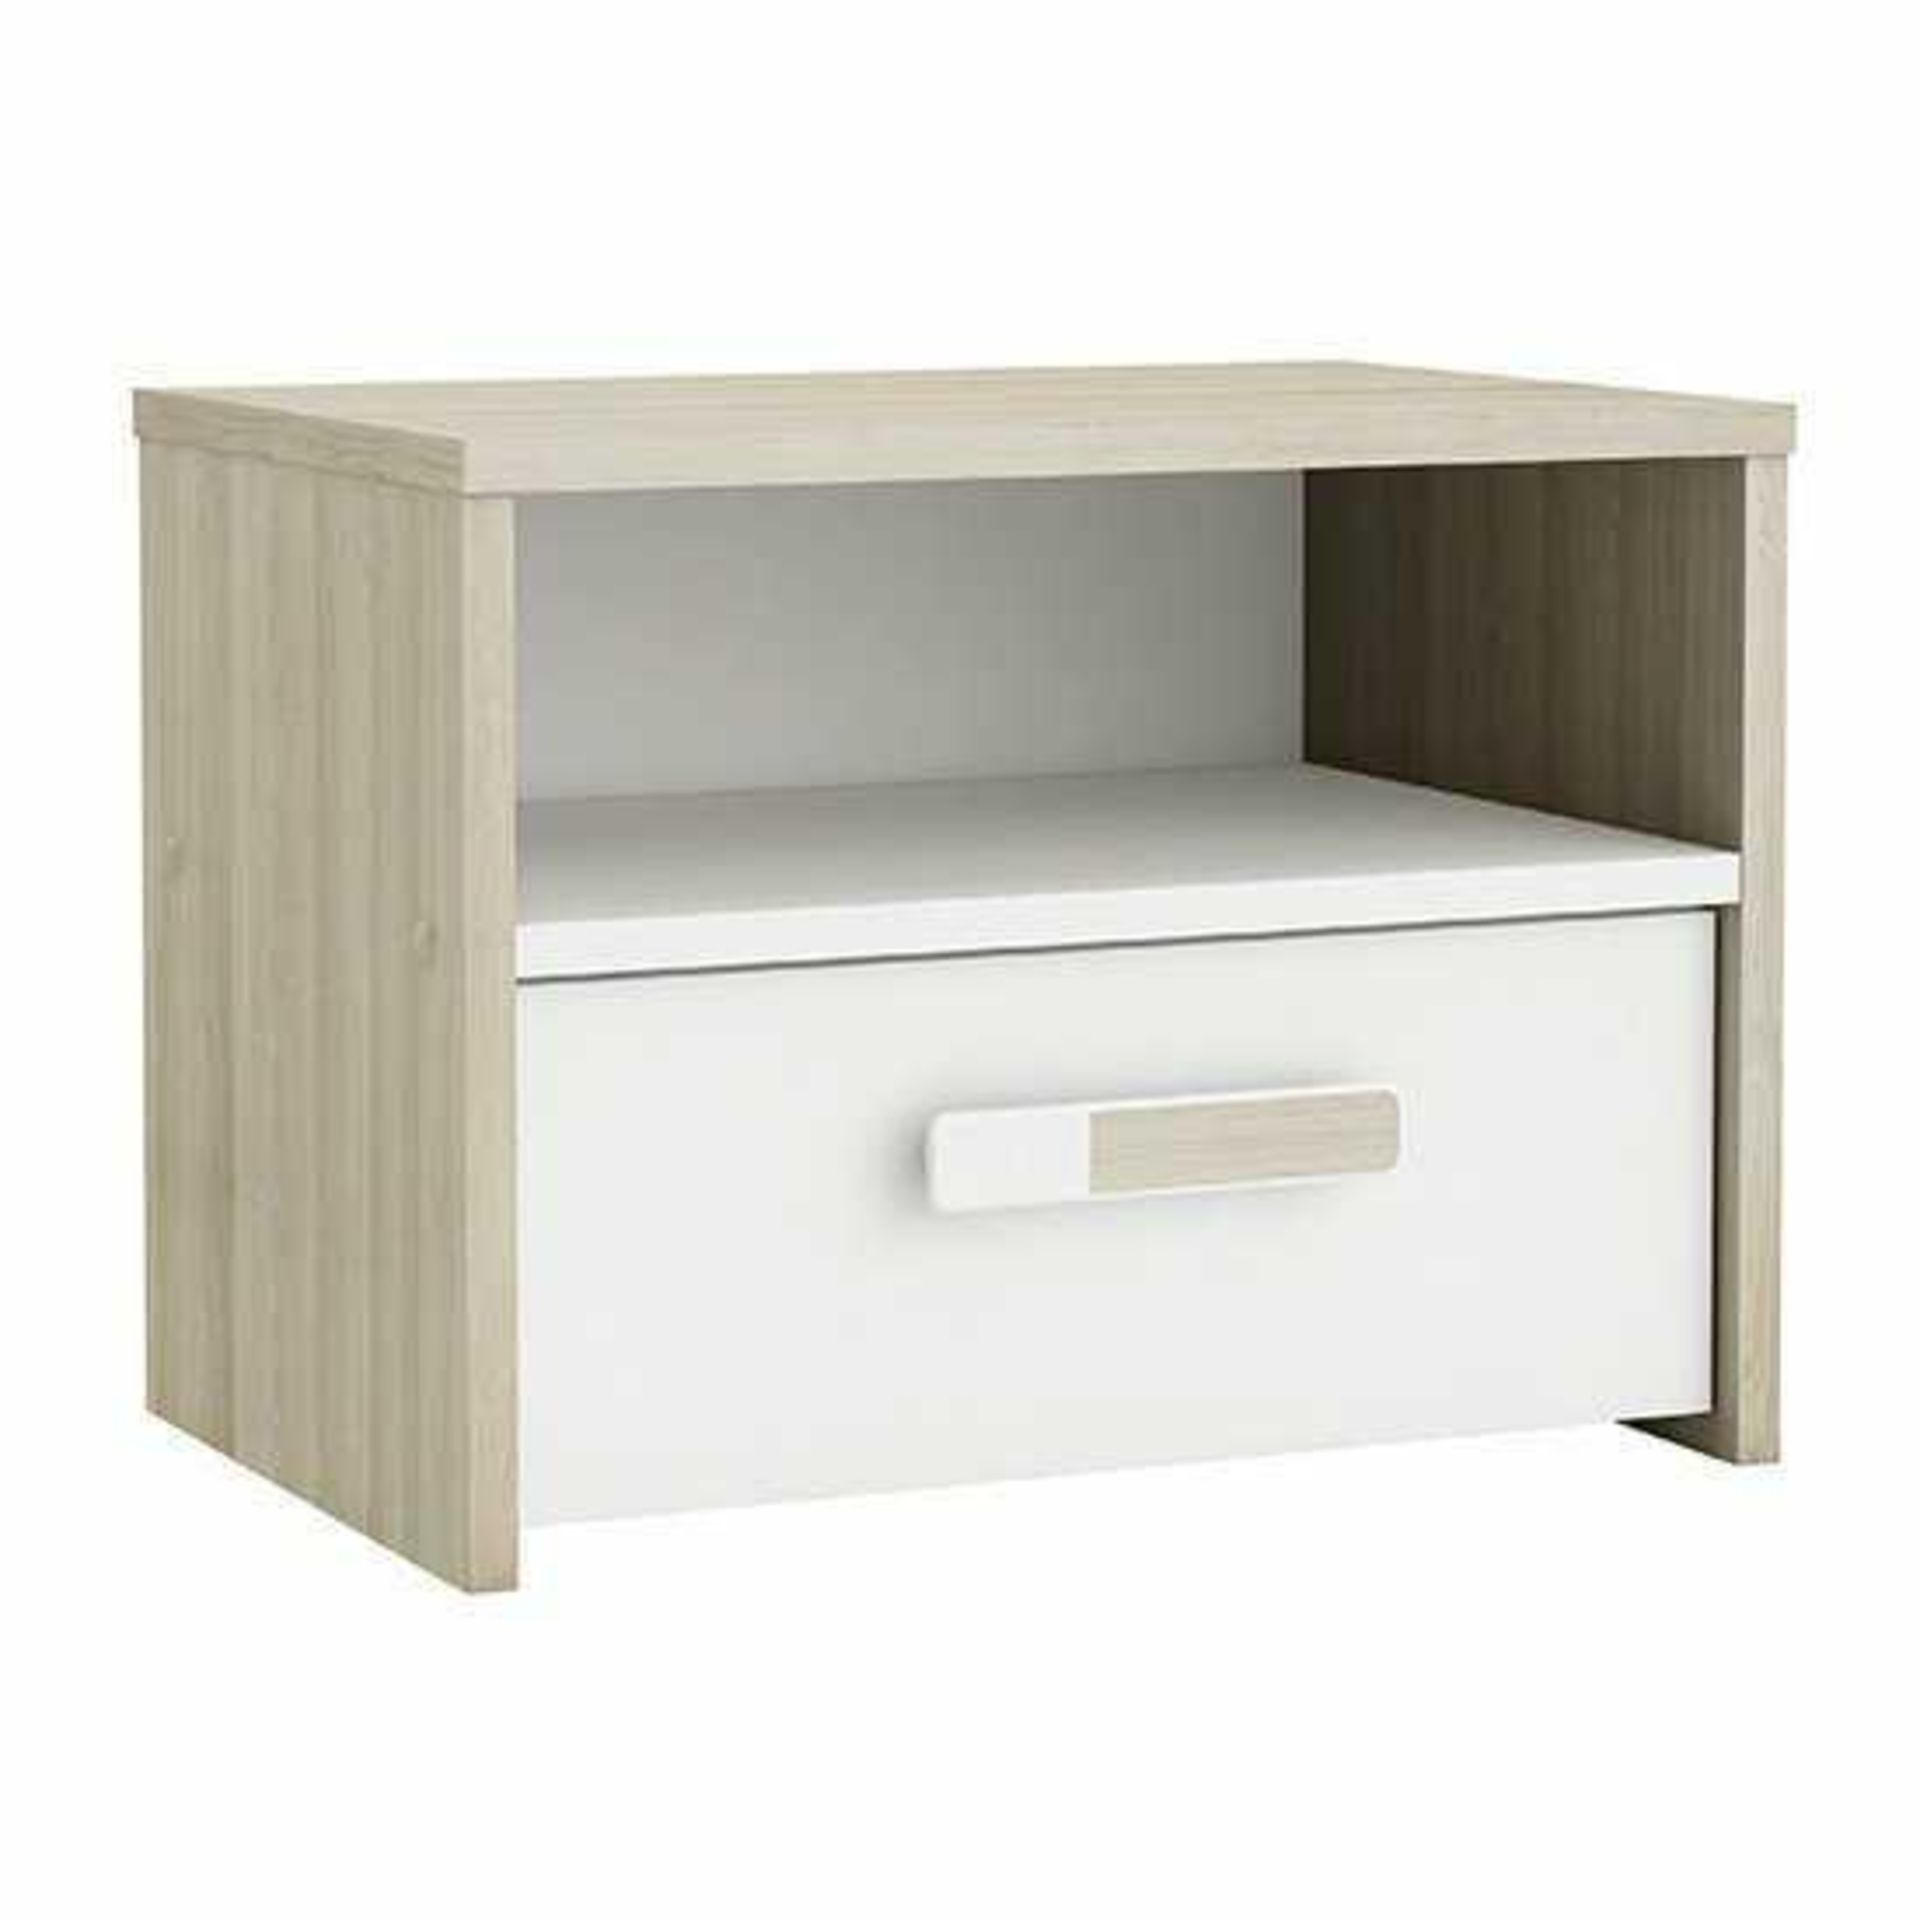 (Db) RRP £80 Lot To Contain One Boxed Swatch Wooden Bedside Cabinet In Shannon Oak And Pearl White.